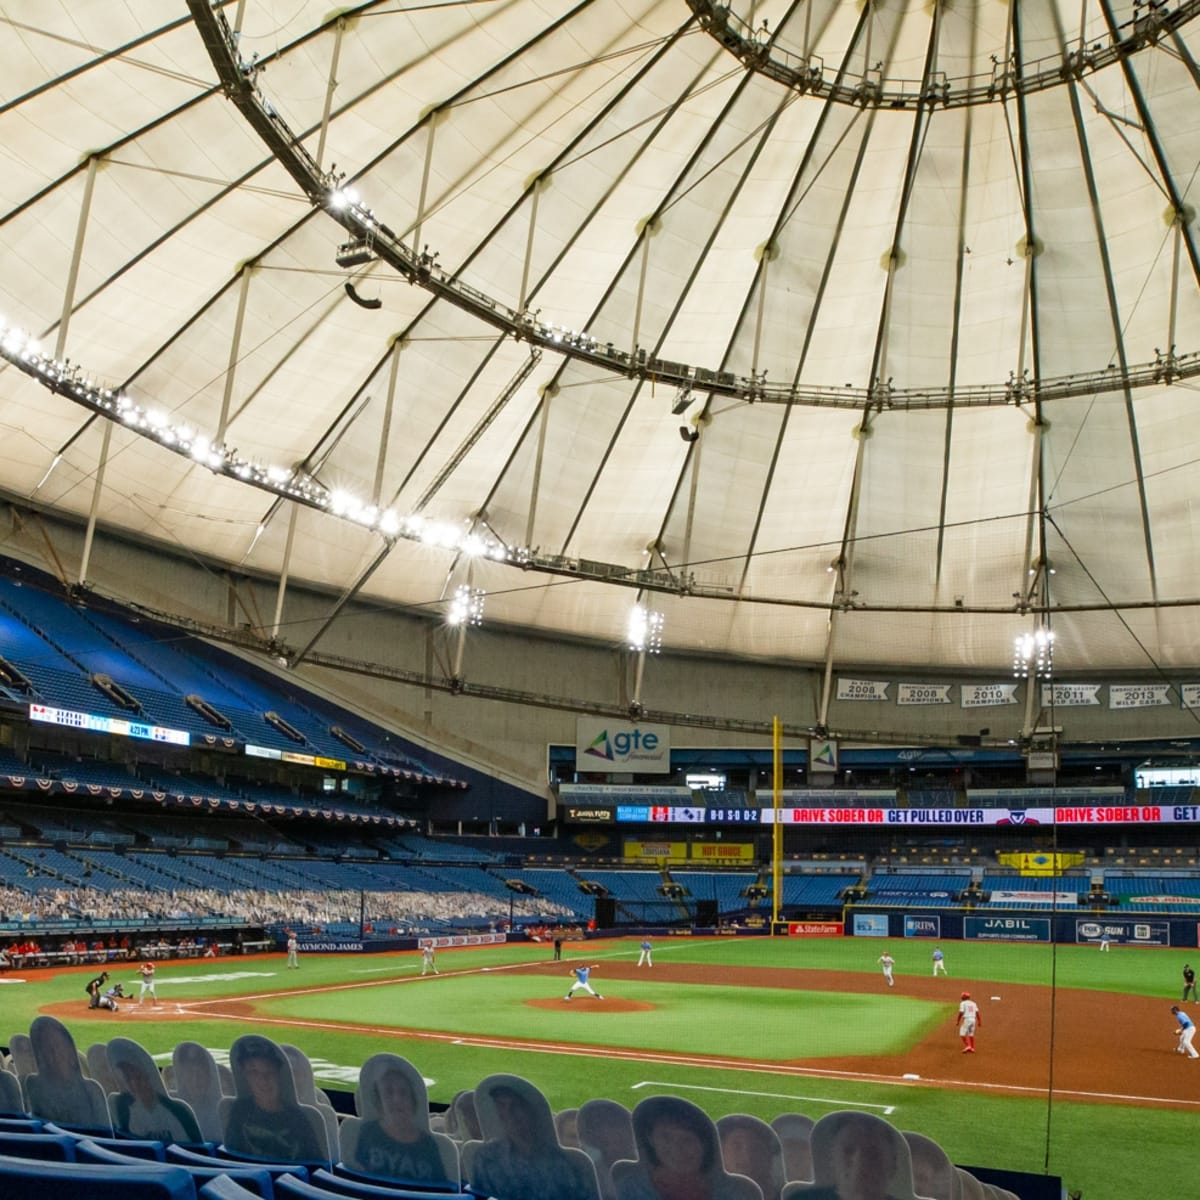 Tampa Bay Rays owner Stu Sternberg sued for alleged 'fraudulent